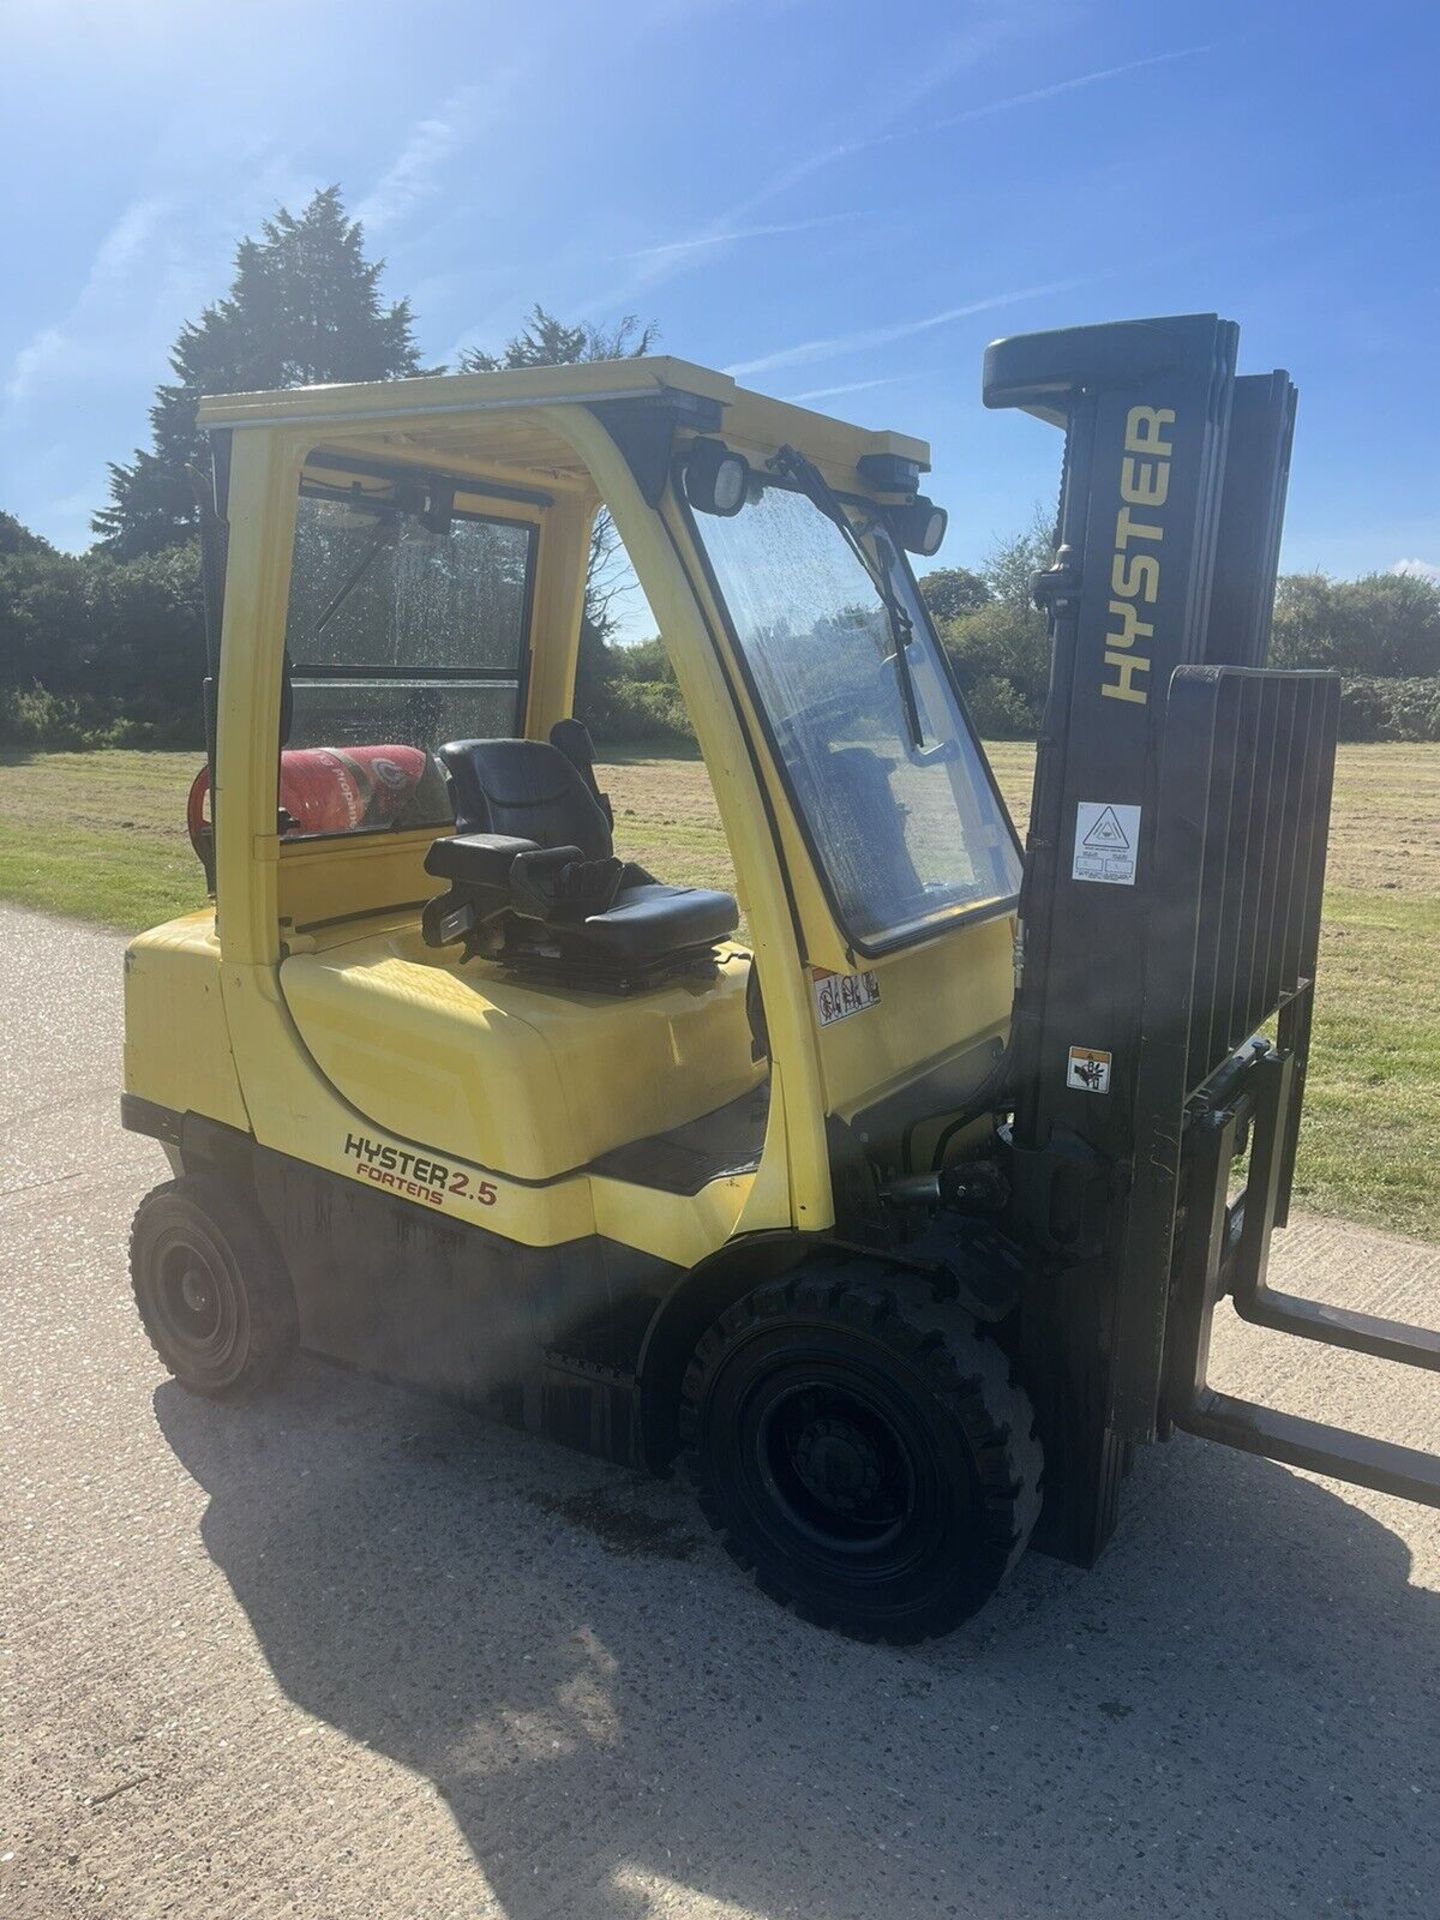 HYSTER / YALE, 2.5 Tonne Gas Forklift (Container Spec) - Image 2 of 5